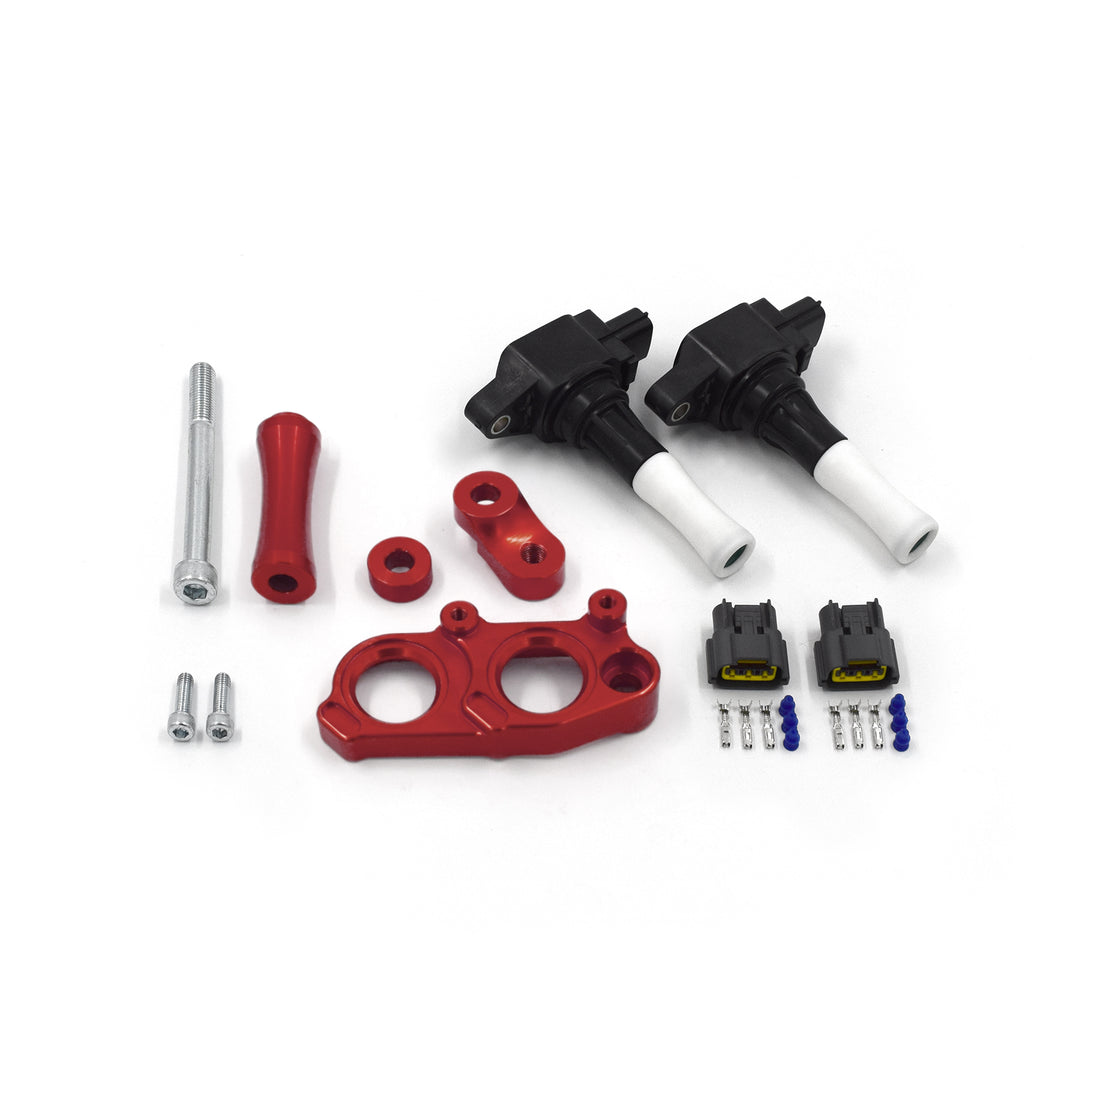 VR38 Coil Kit for Mazda Rotary Engines